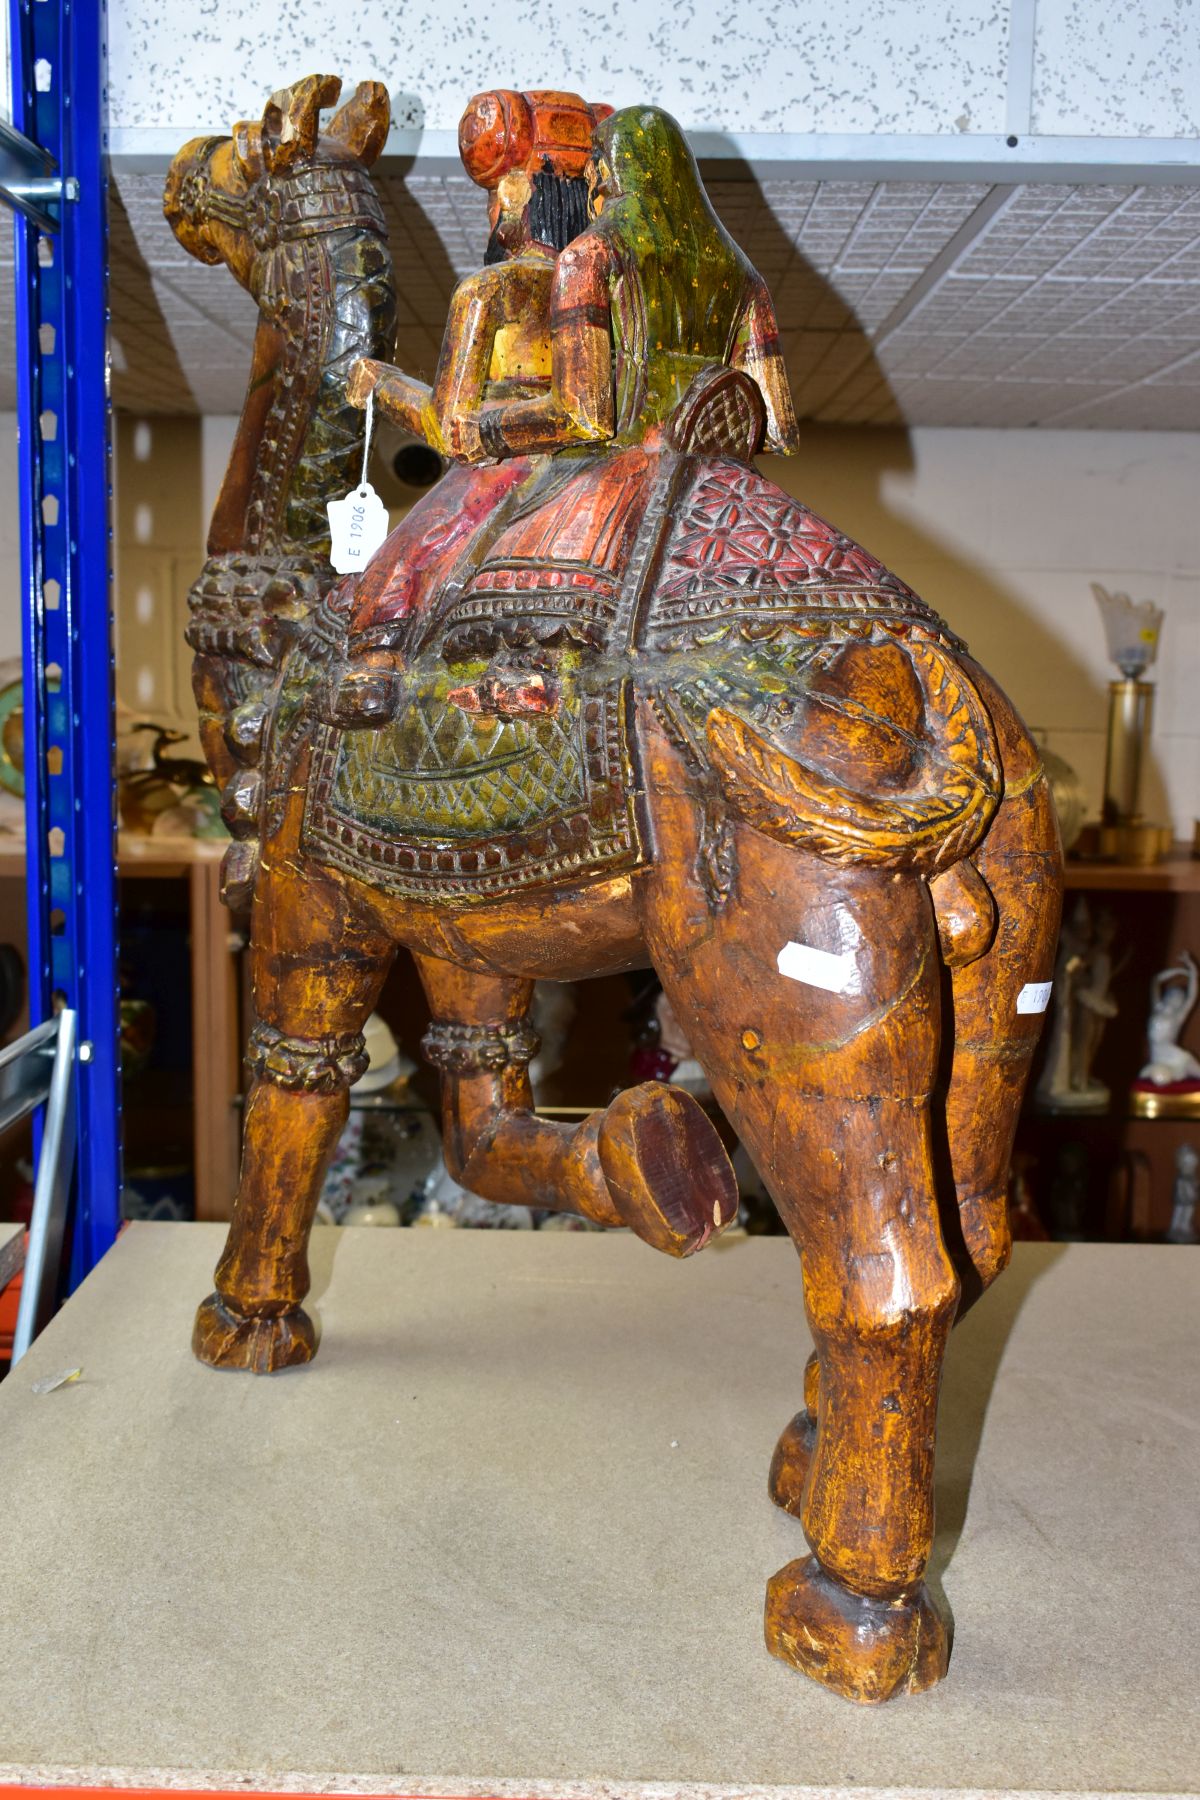 A LARGE WOODEN CARVED CAMEL WITH RIDERS, with carved and painted details, it may depict the - Image 4 of 9